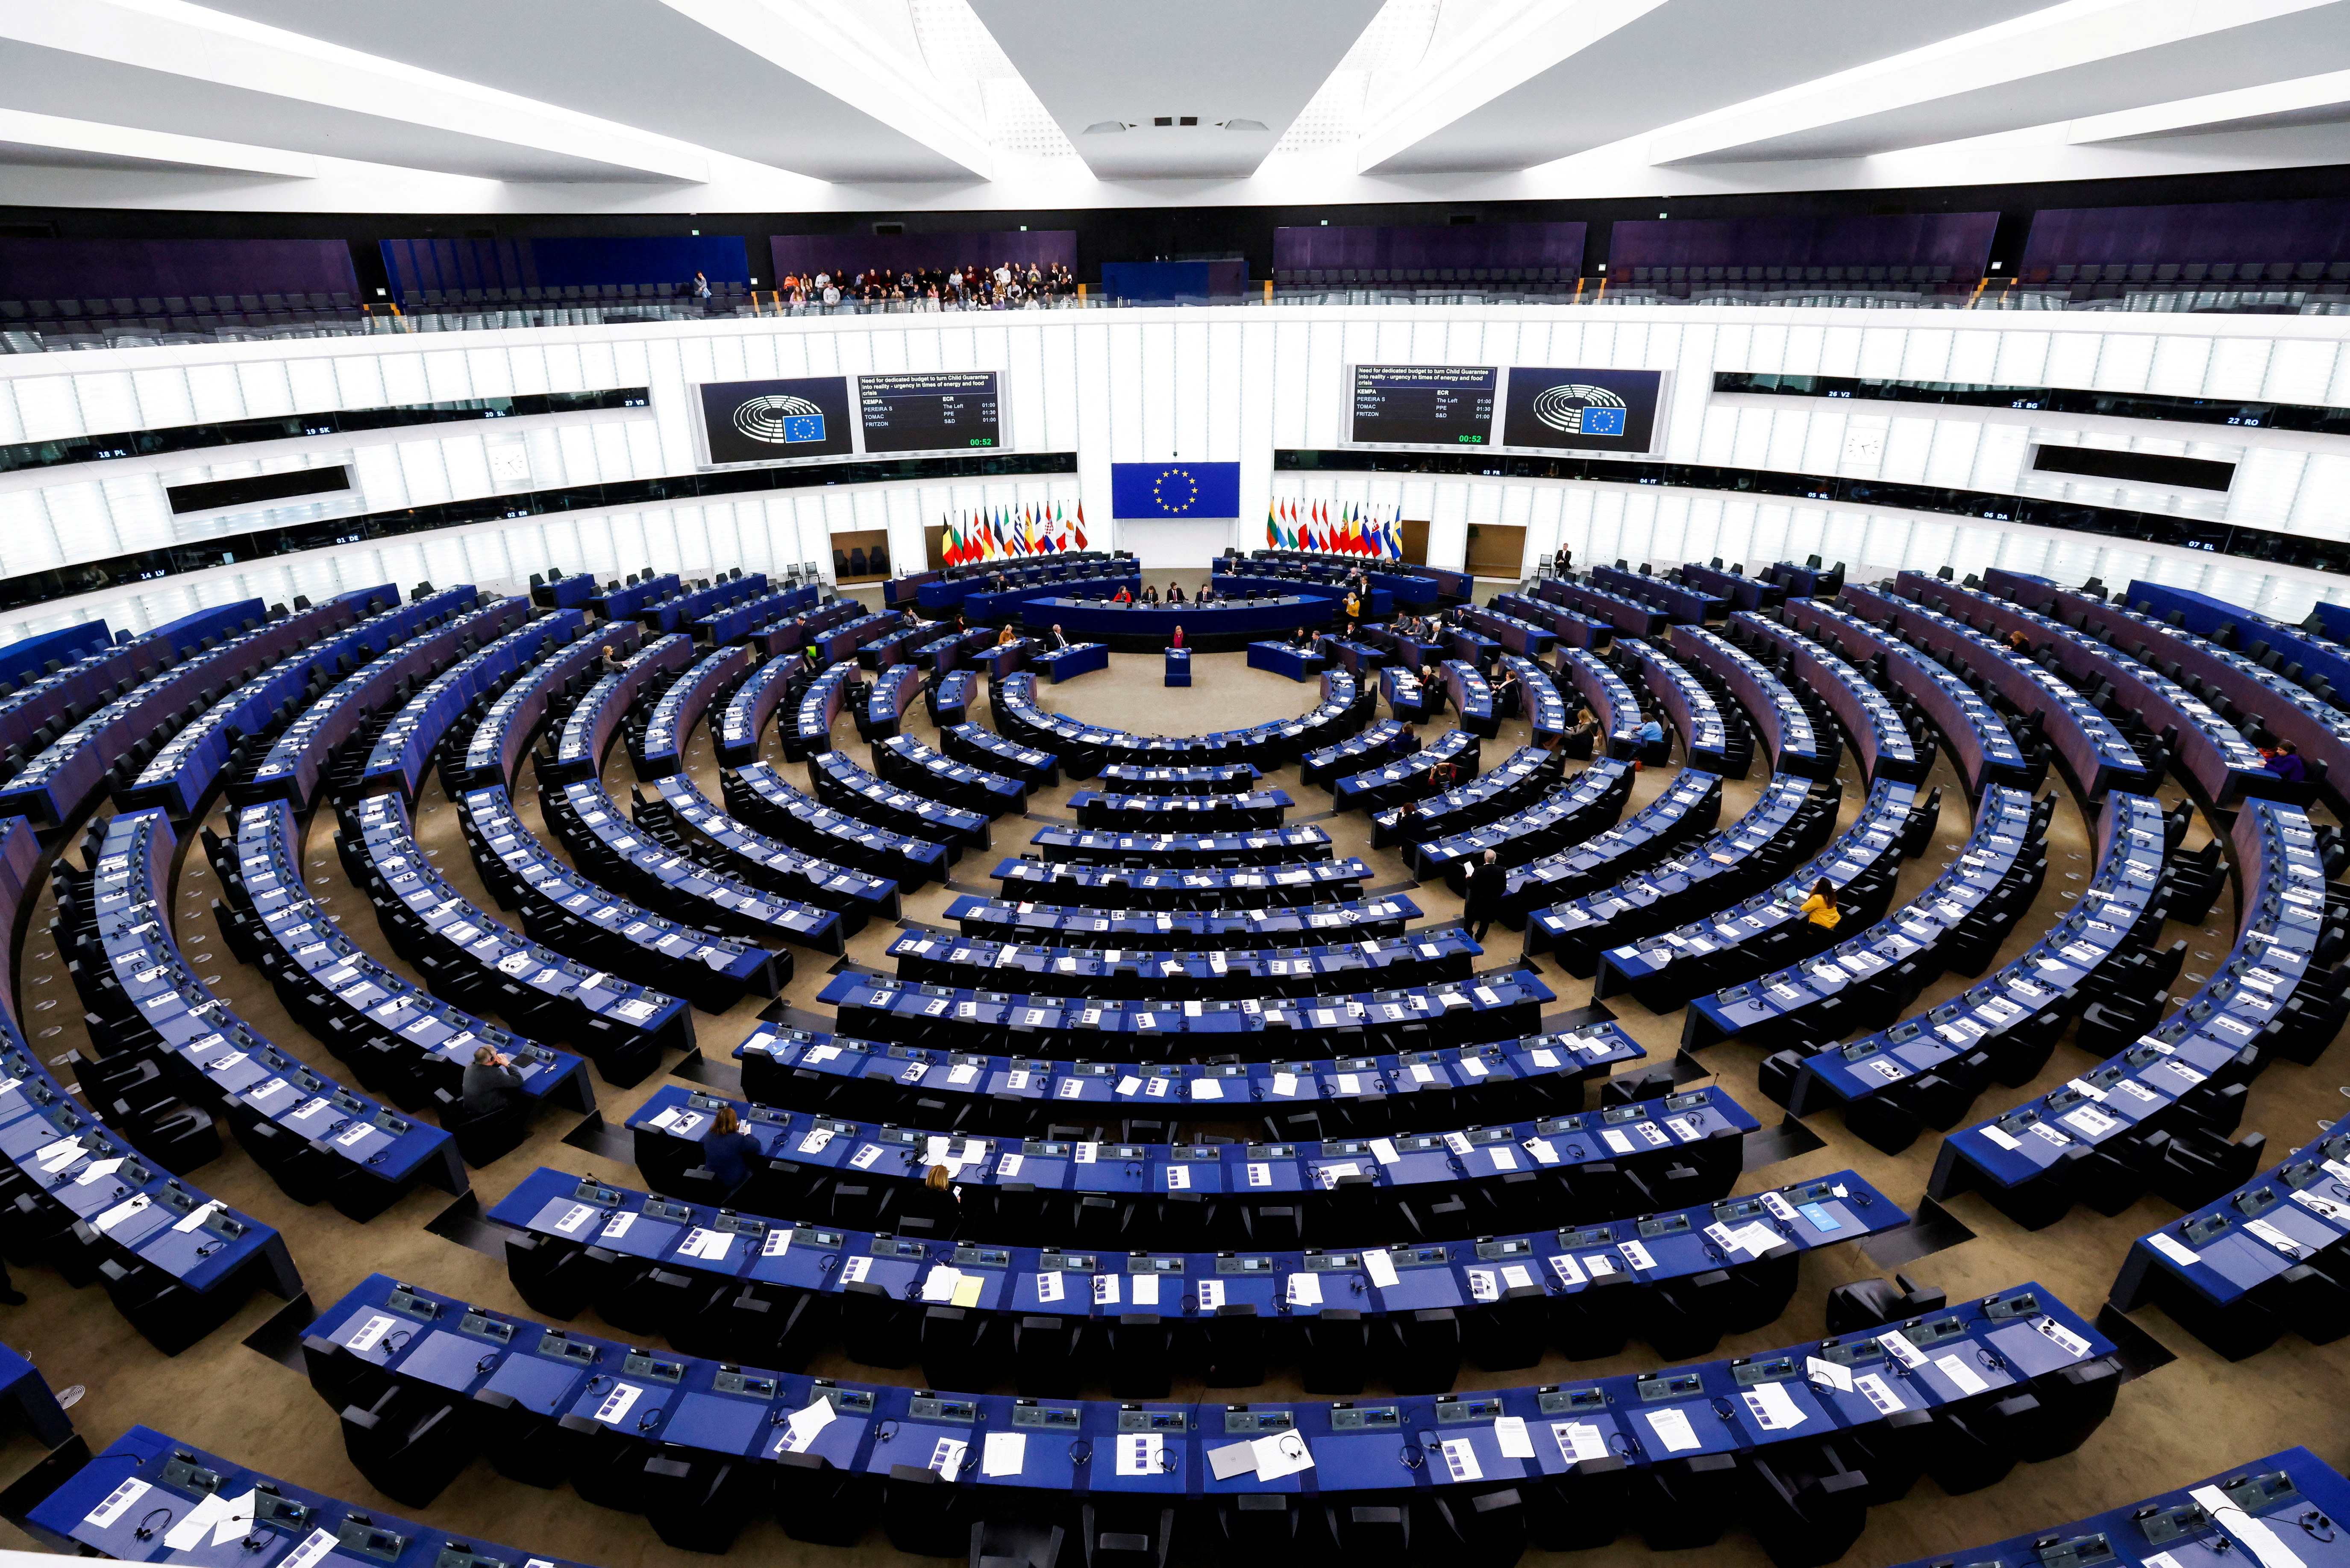 Plenary session at the European Parliament in Strasbourg